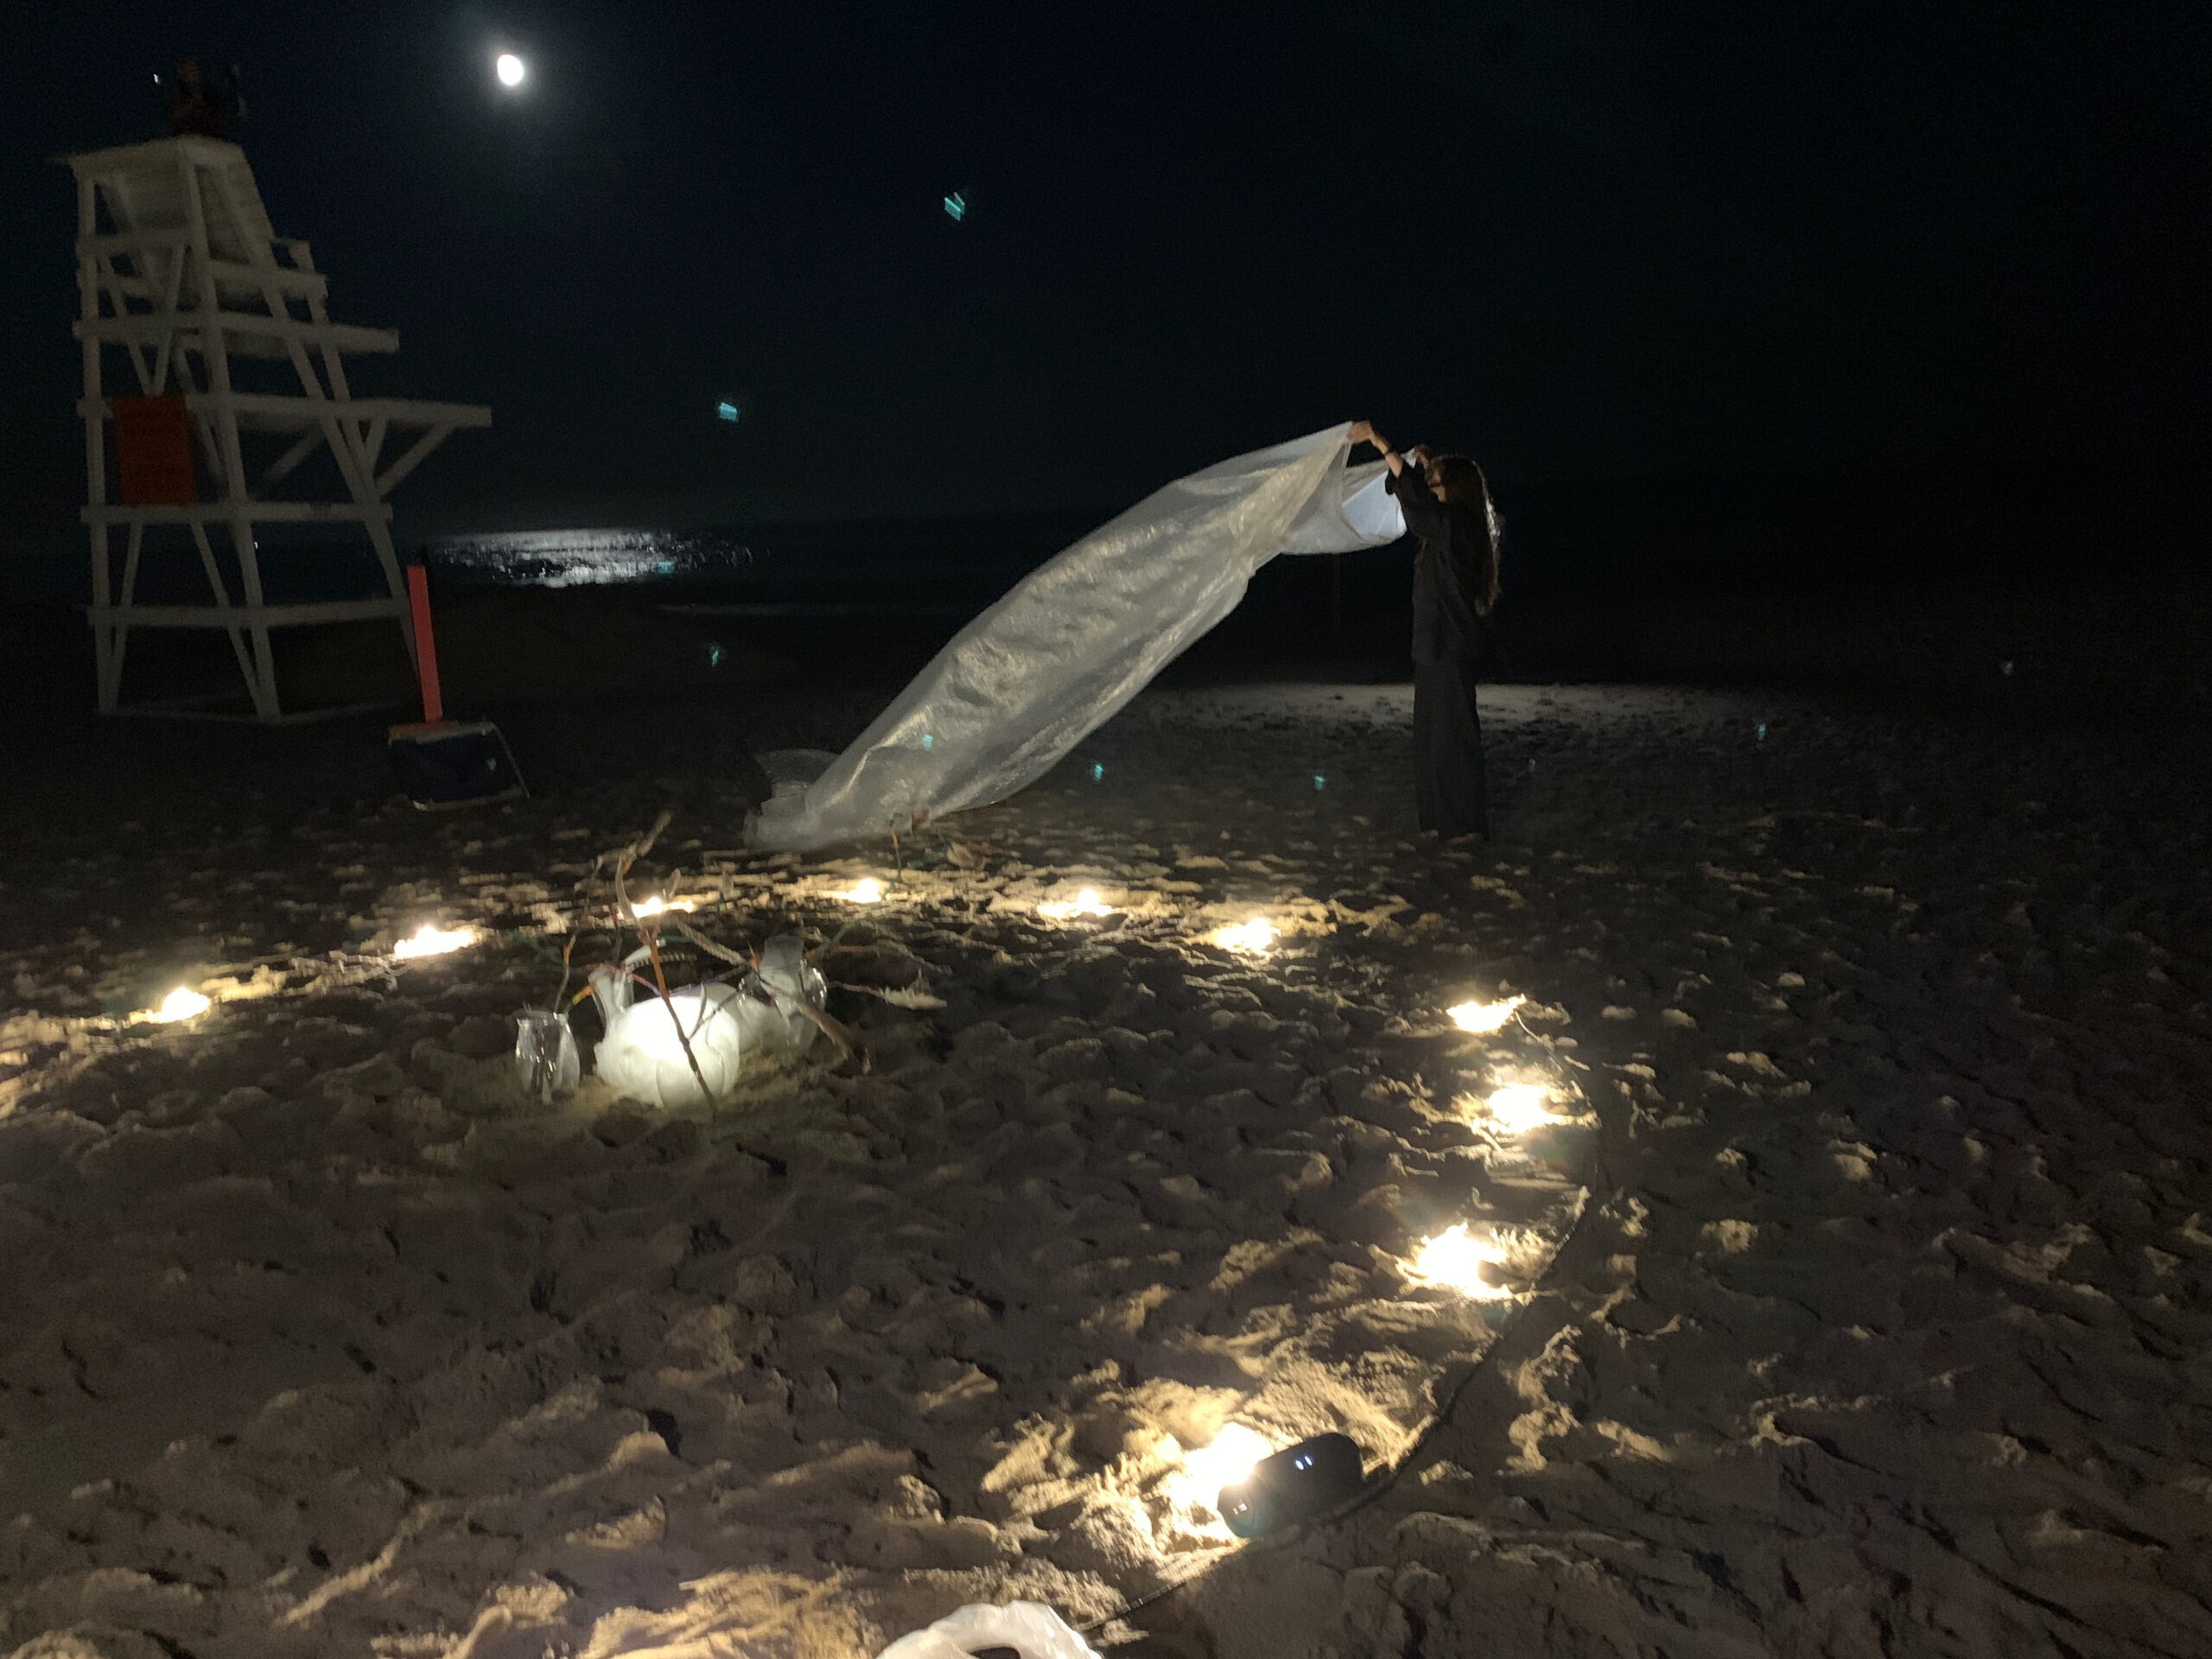 Artist Elana Bajo performing her art piece under the full moon at East Hampton's Main Beach on September 10 in response to a musical love letter from West Coast artist Jasmine Orpilla. ANNETTE HINKLE